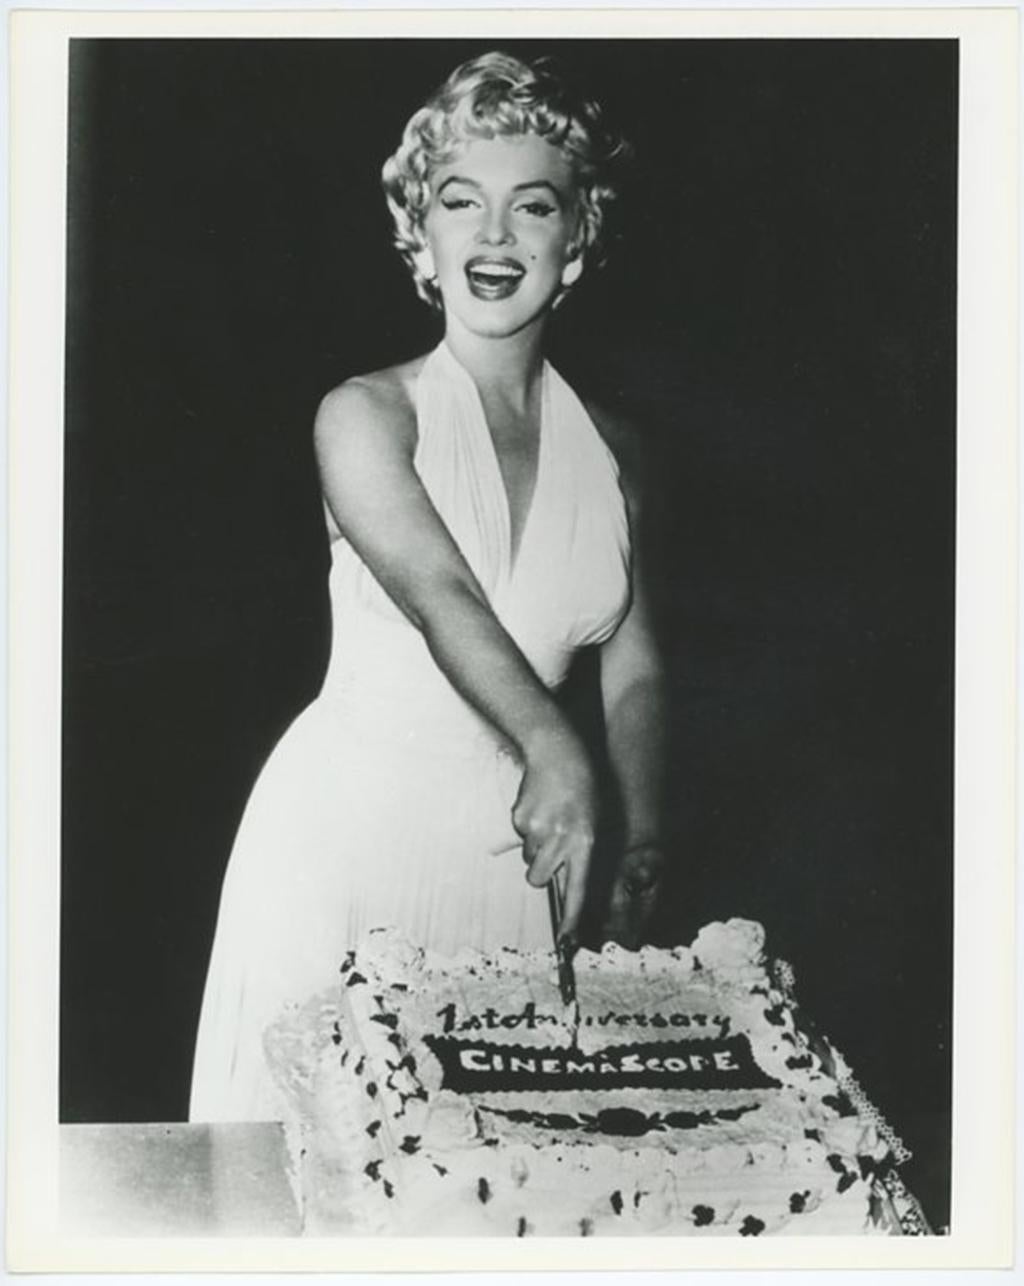 Unknown Black and White Photograph - Marilyn Monroe 1st Anniversary Cinemascope